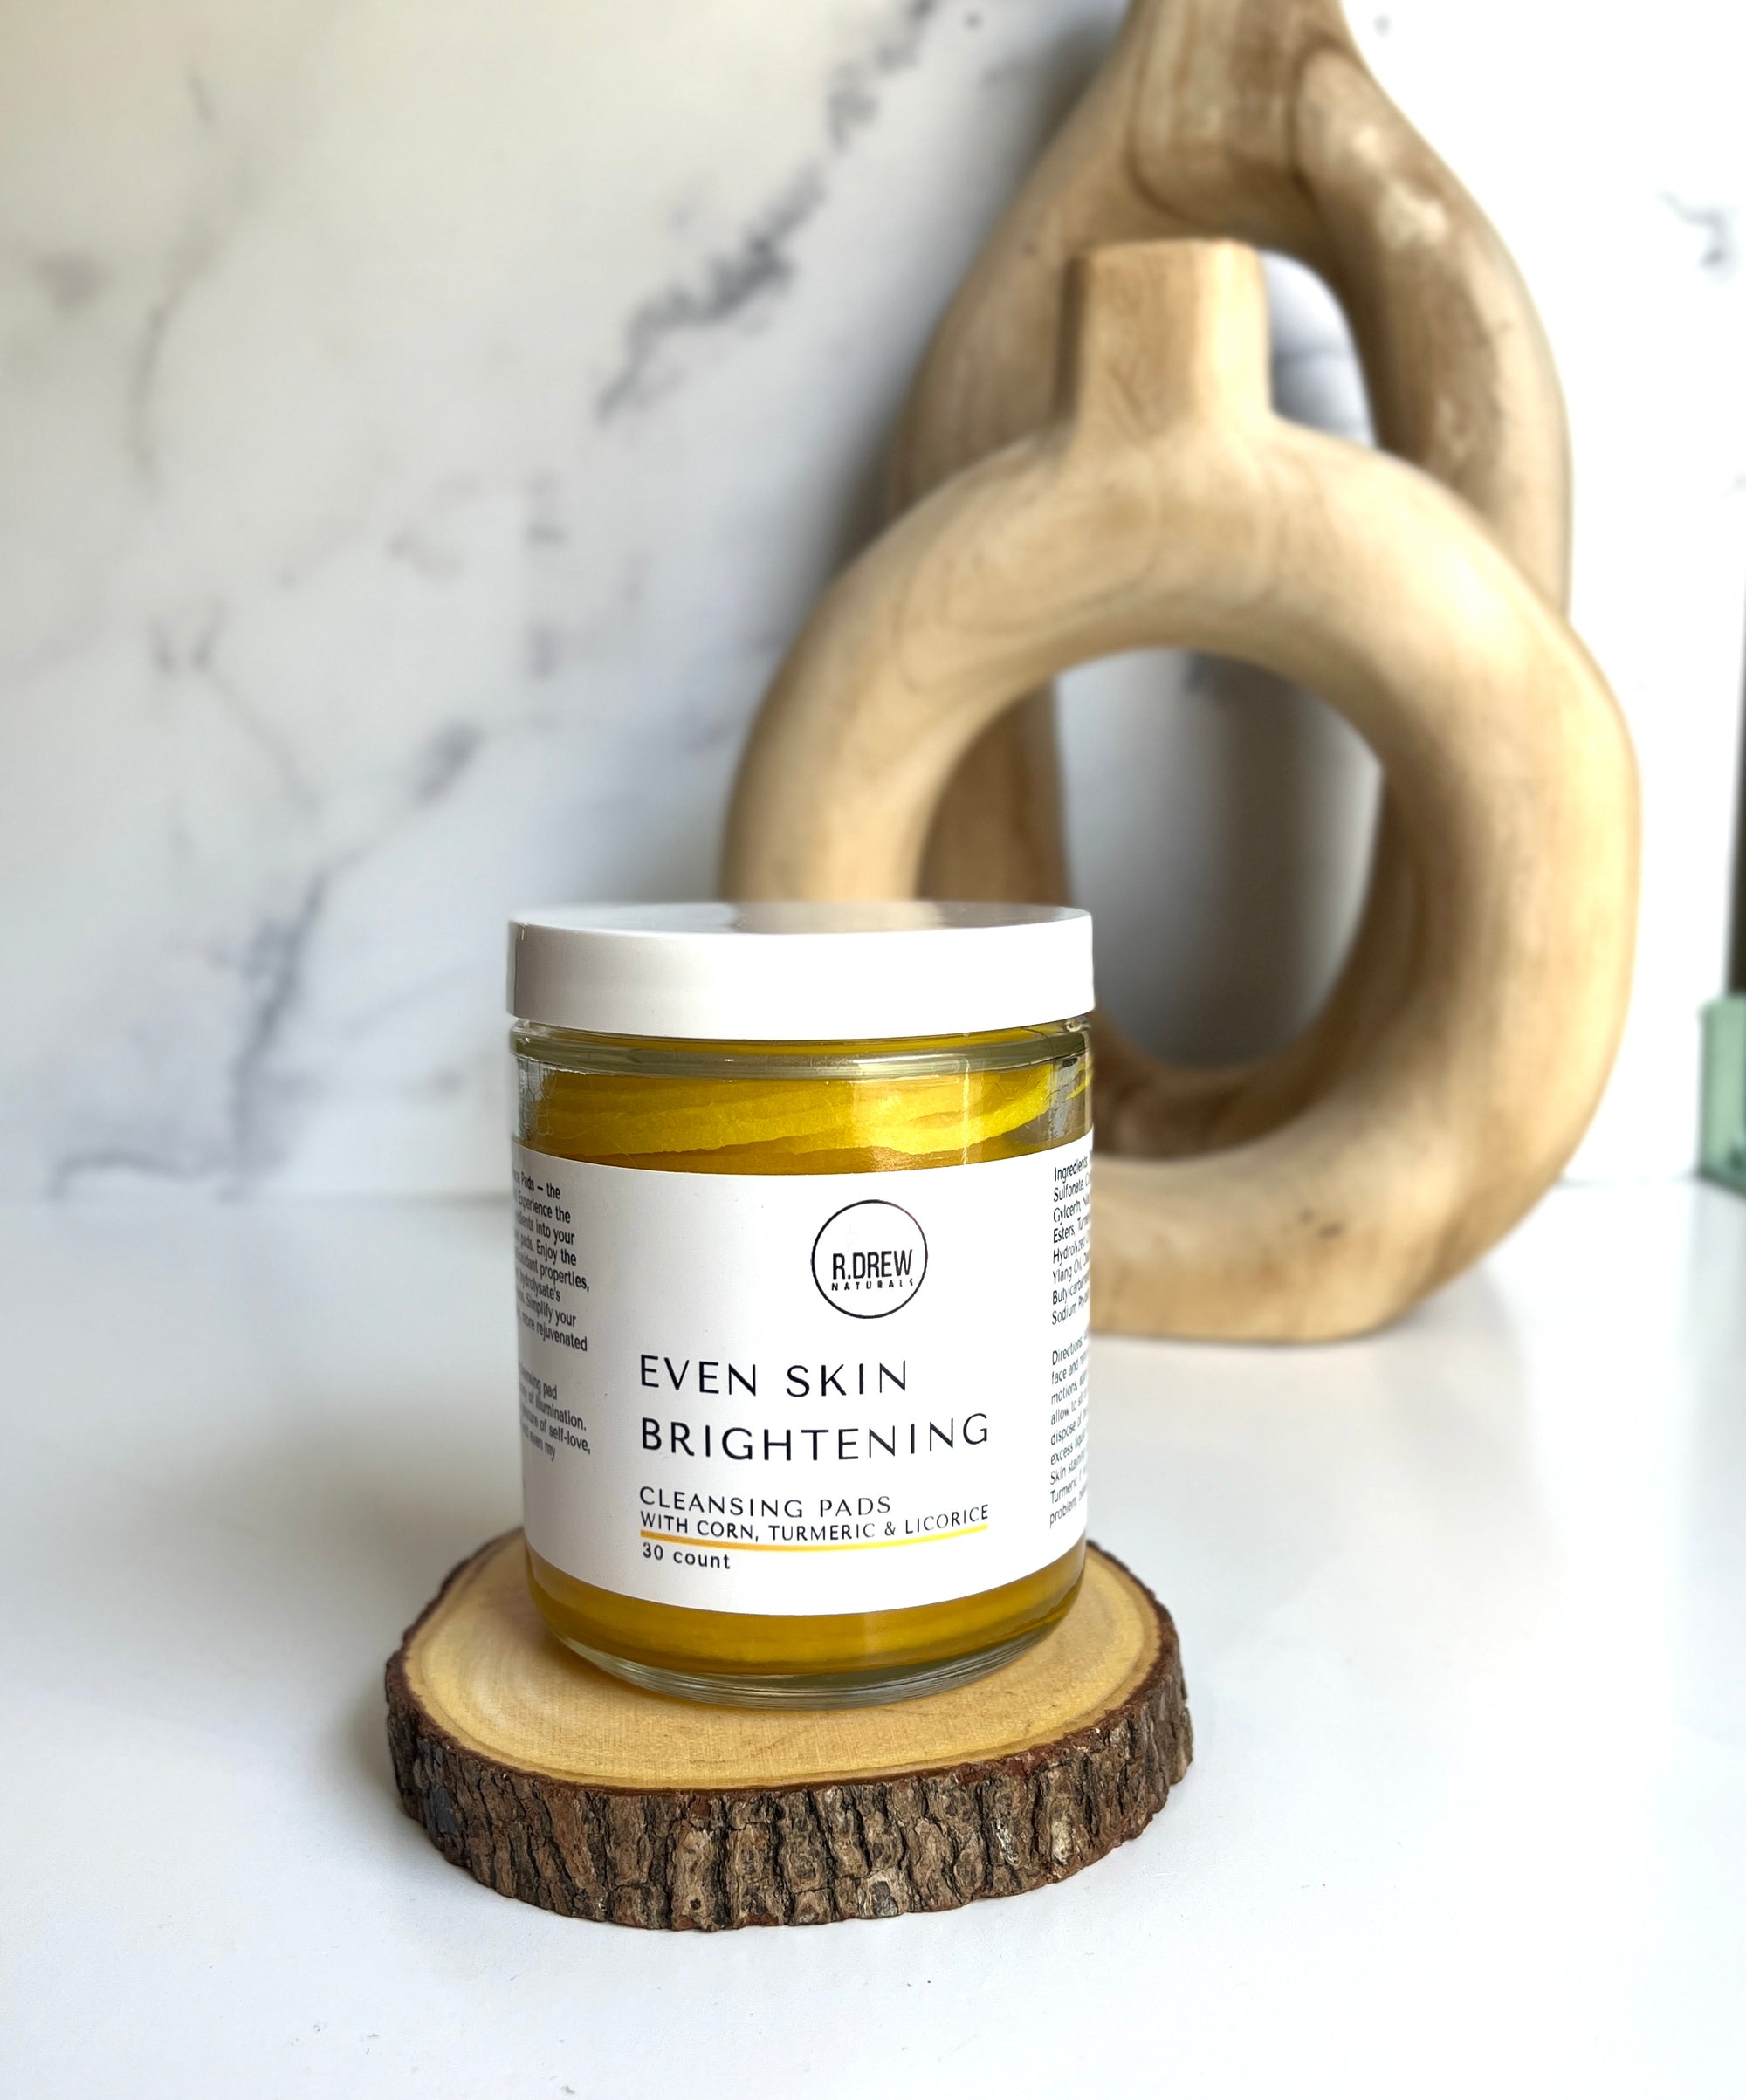 Revitalize Your Skincare Routine with Turmeric, Licorice, and Corn Hydrolate Infused Cleansing Face Pads